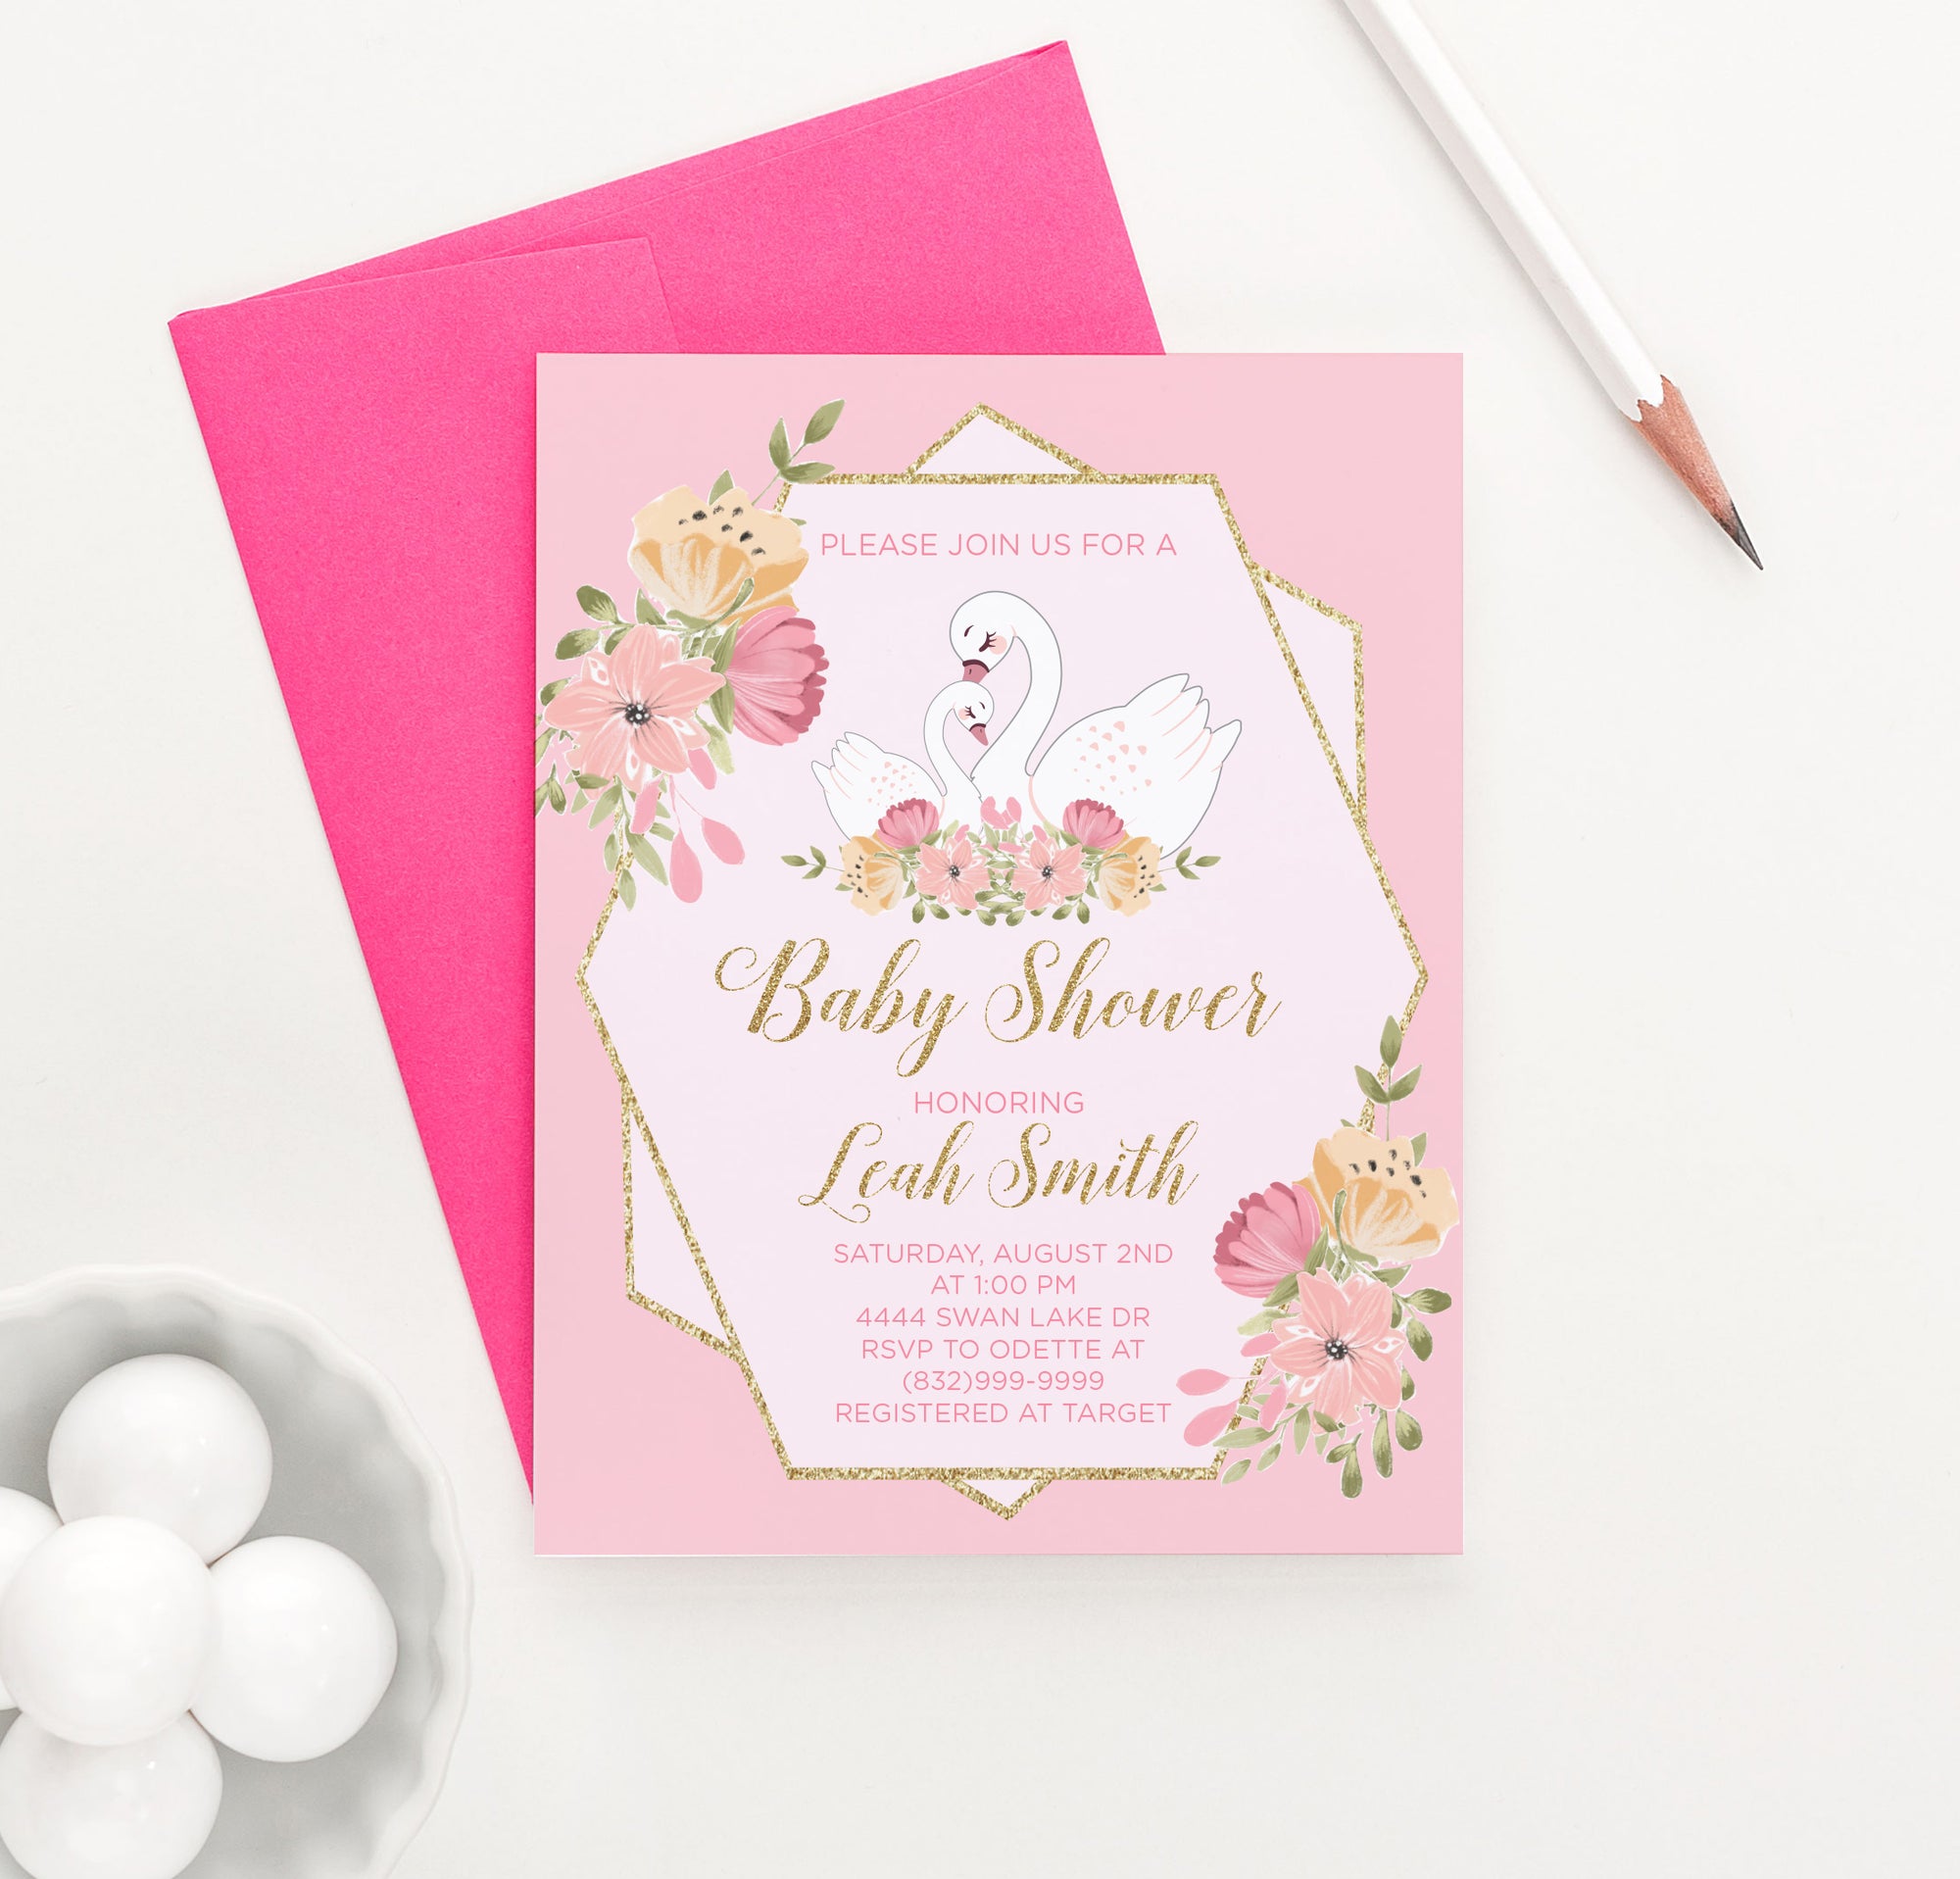 Elegant Pink Floral Baby Shower Invitations With Swan